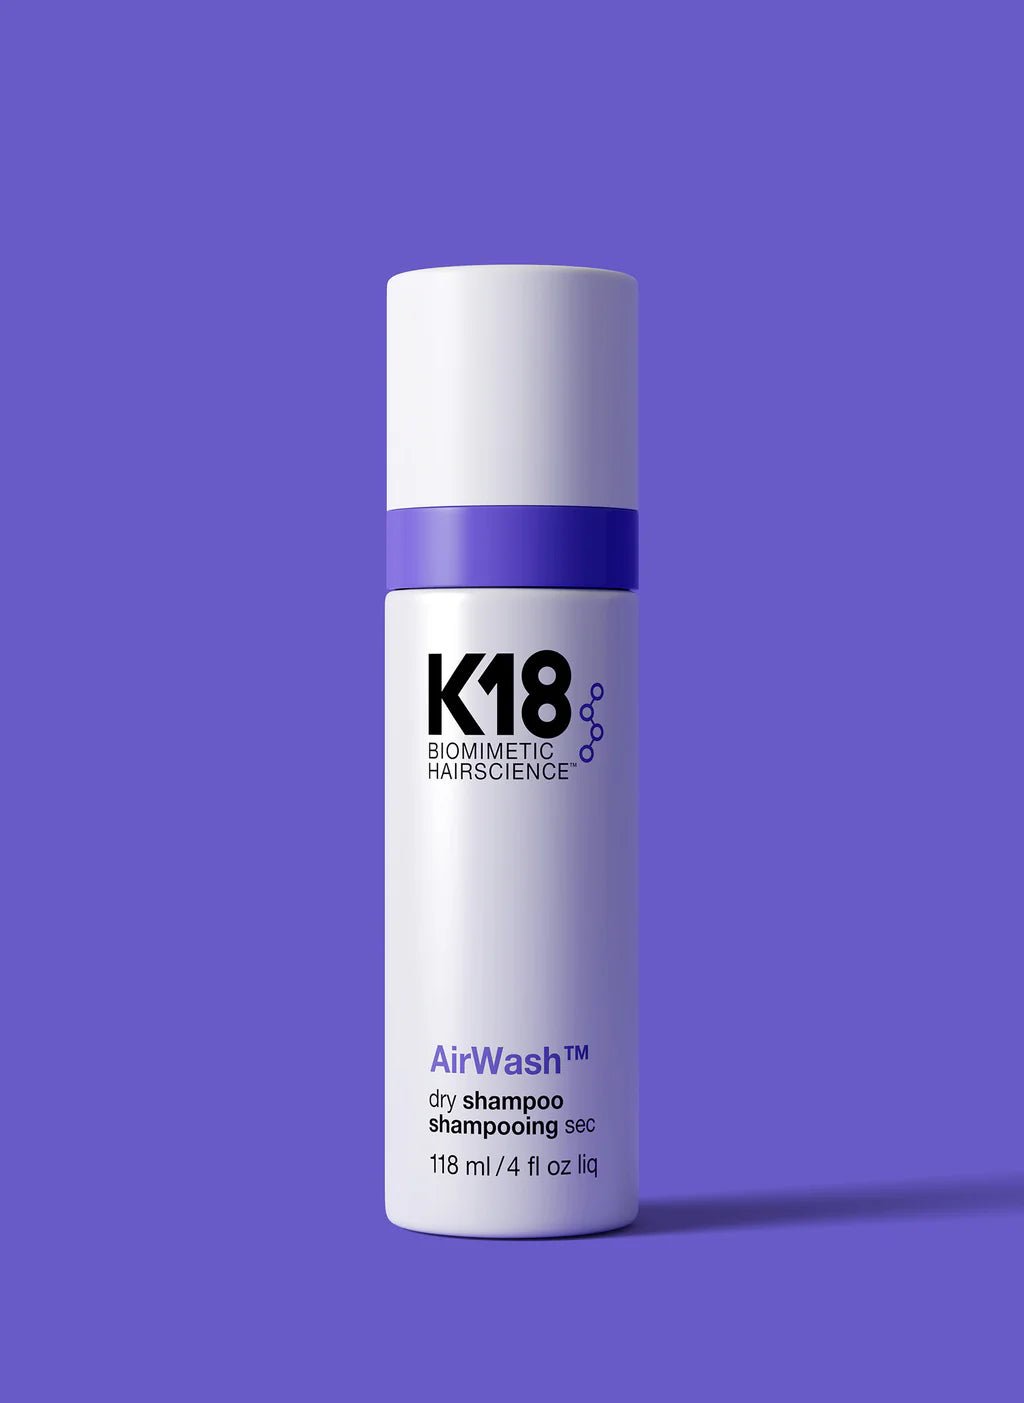 A white and purple bottle of K18 AirWash Dry Shampoo by Simply Colour Hair Salon Studio & Online Store, utilizing odorBIND biotechnology to reduce oil, containing 118 ml (4 fl oz). The bottle stands against a solid purple background.